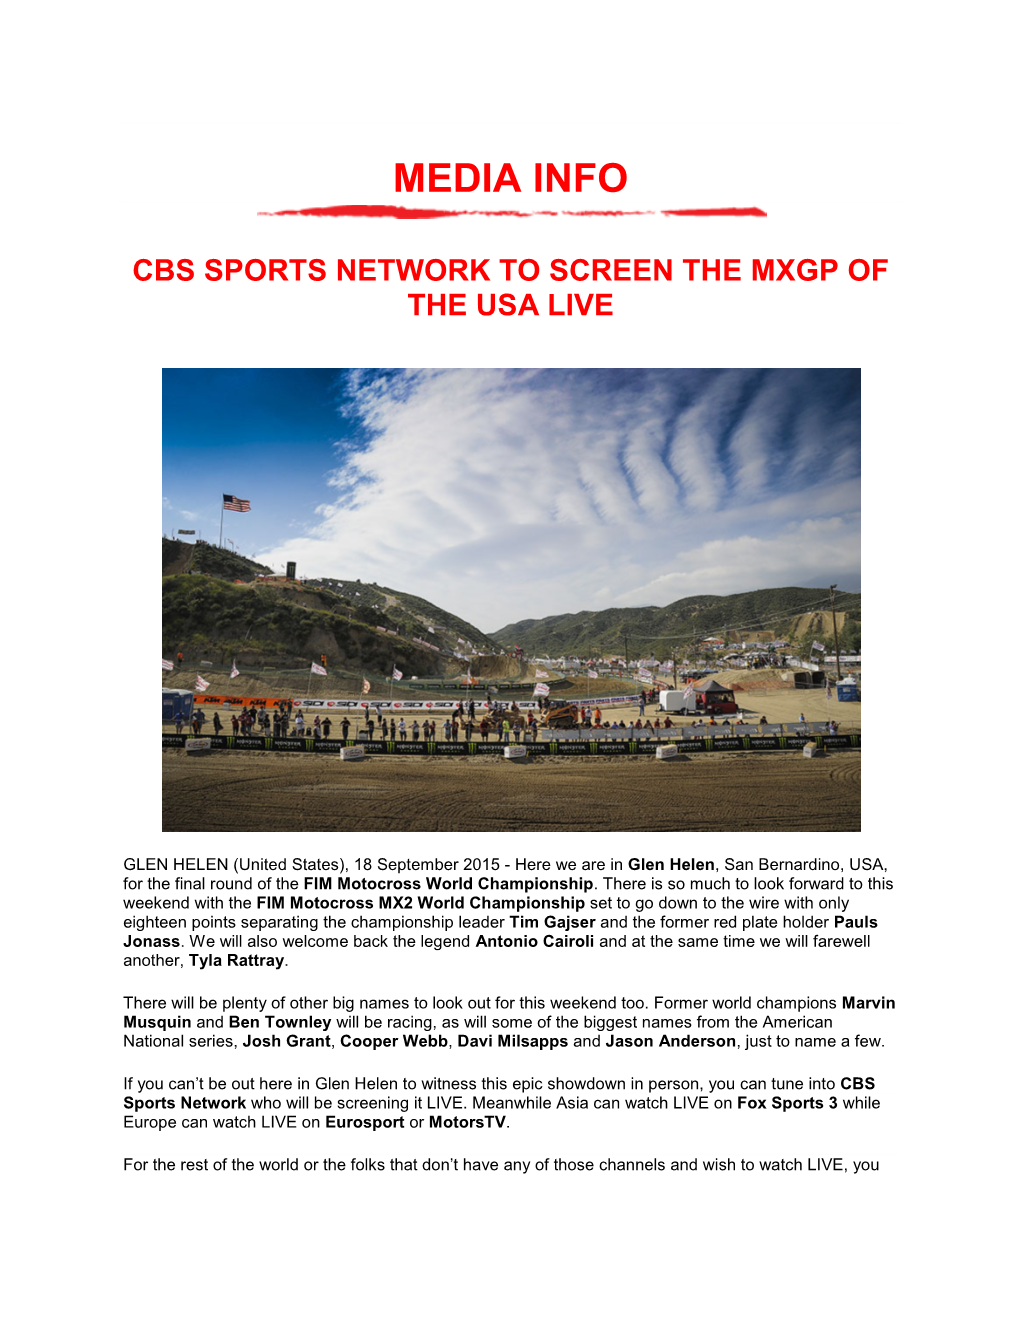 Watch the Usgp Live on Cbs Sports Network!